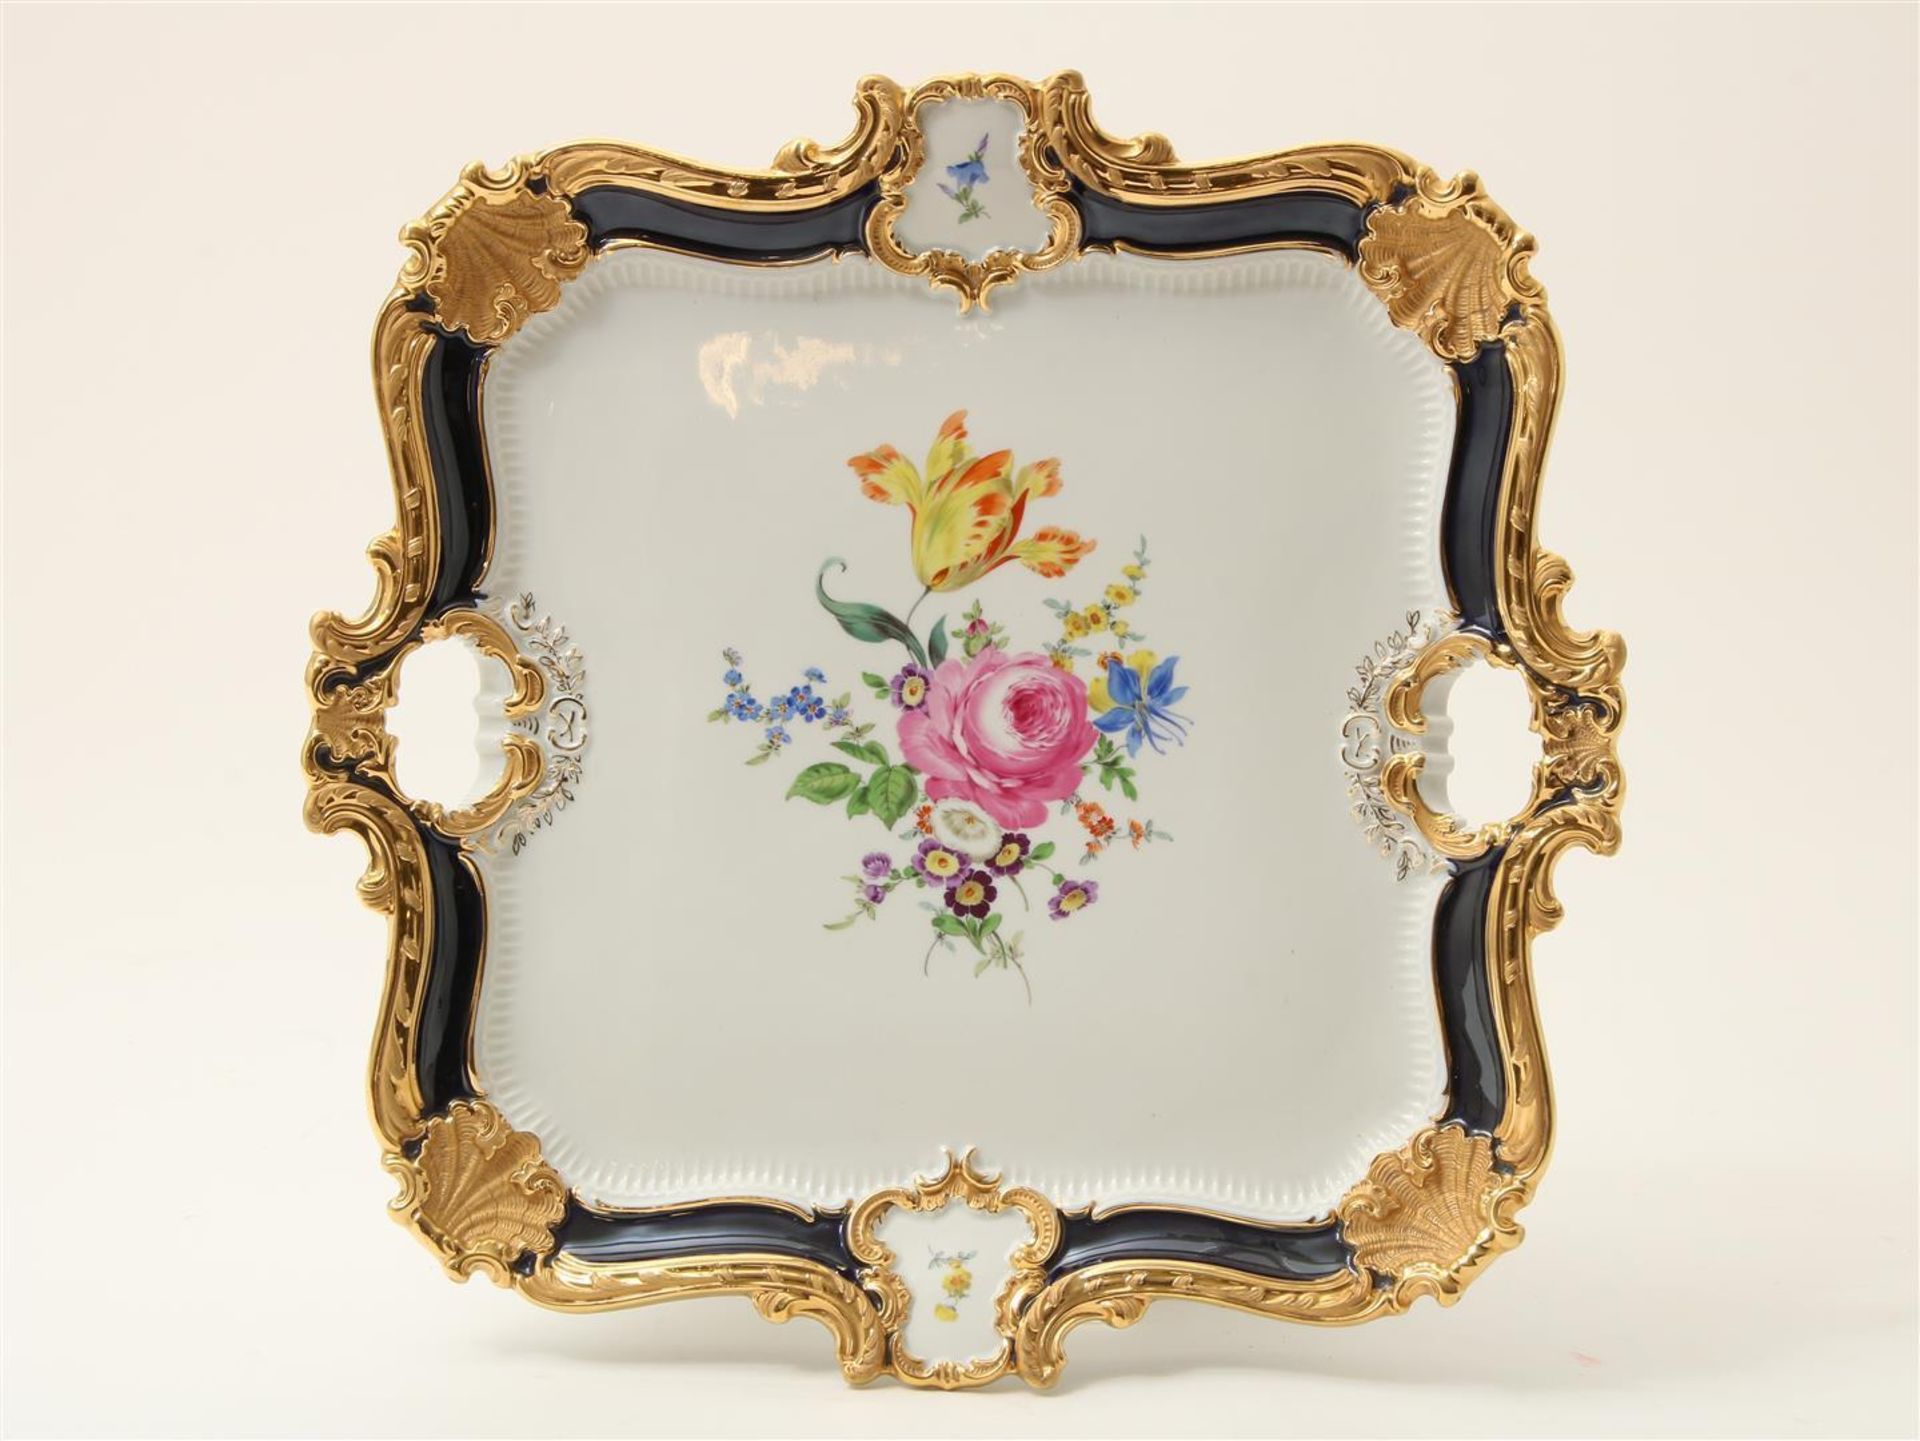 Porcelain Meissen tray with central polychrome decor of flowers in relief and decorated with